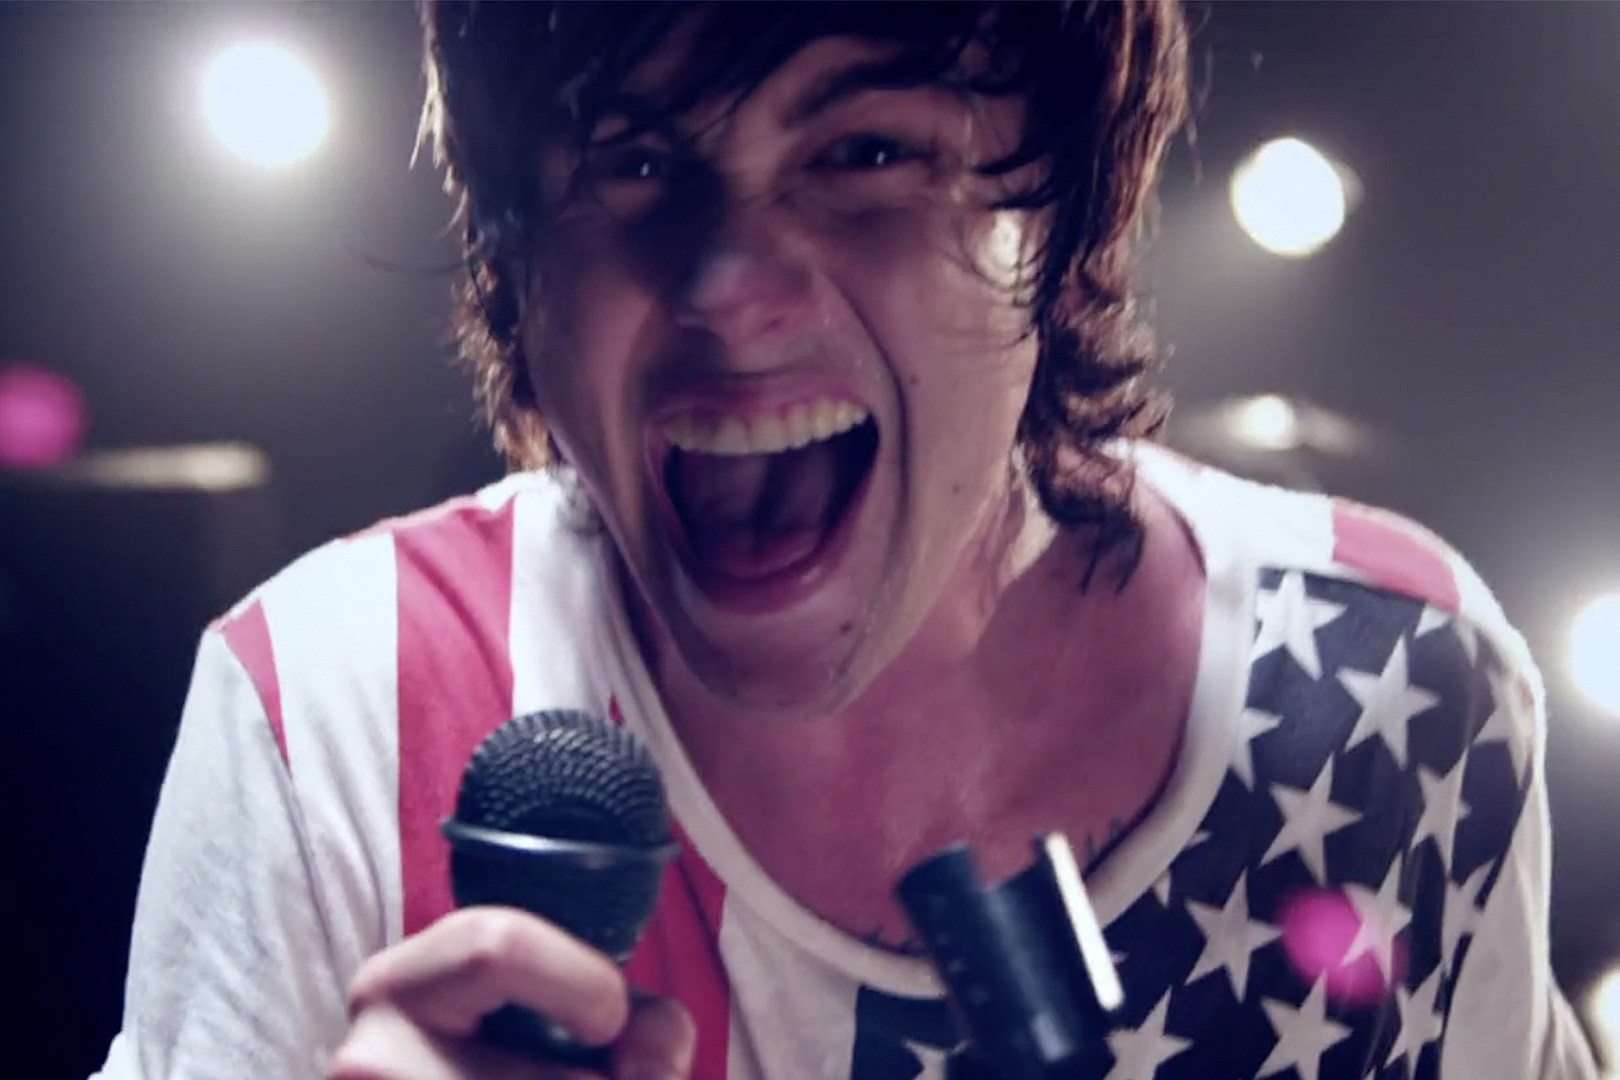 Best Sleeping With Sirens Songs of All Time - Top 10 Tracks